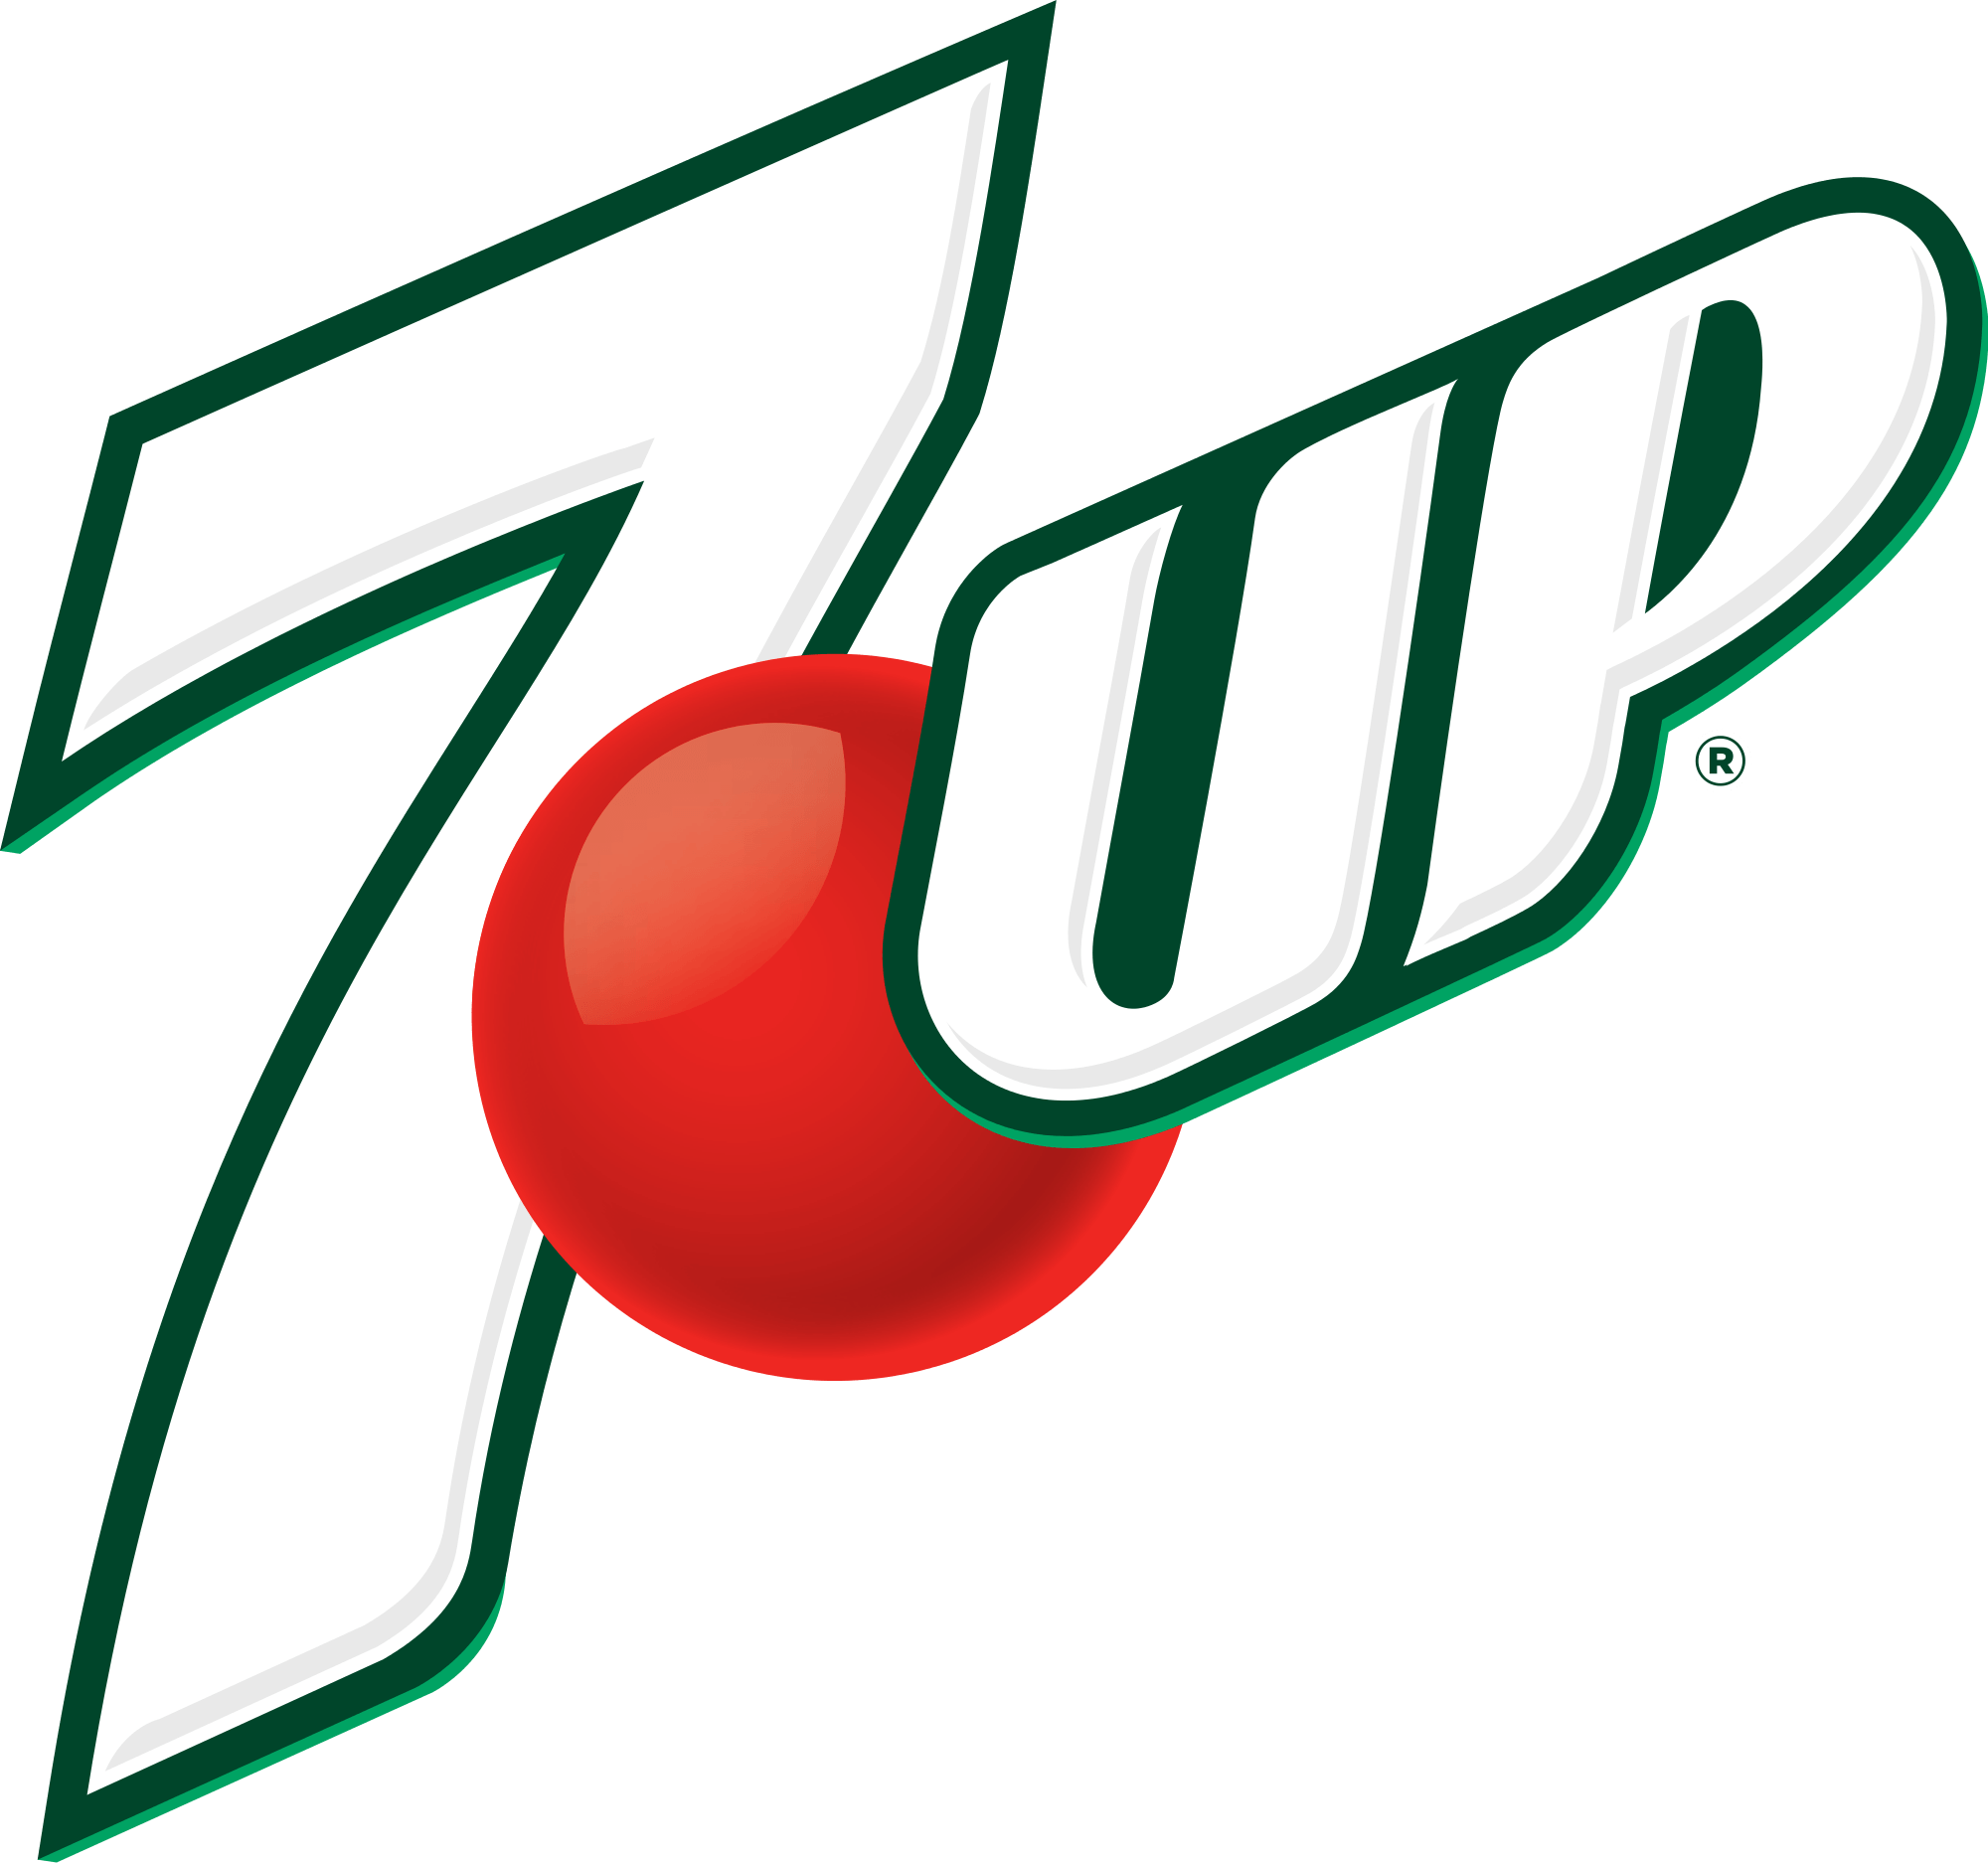 Cool Made Up Logo - 7 Up